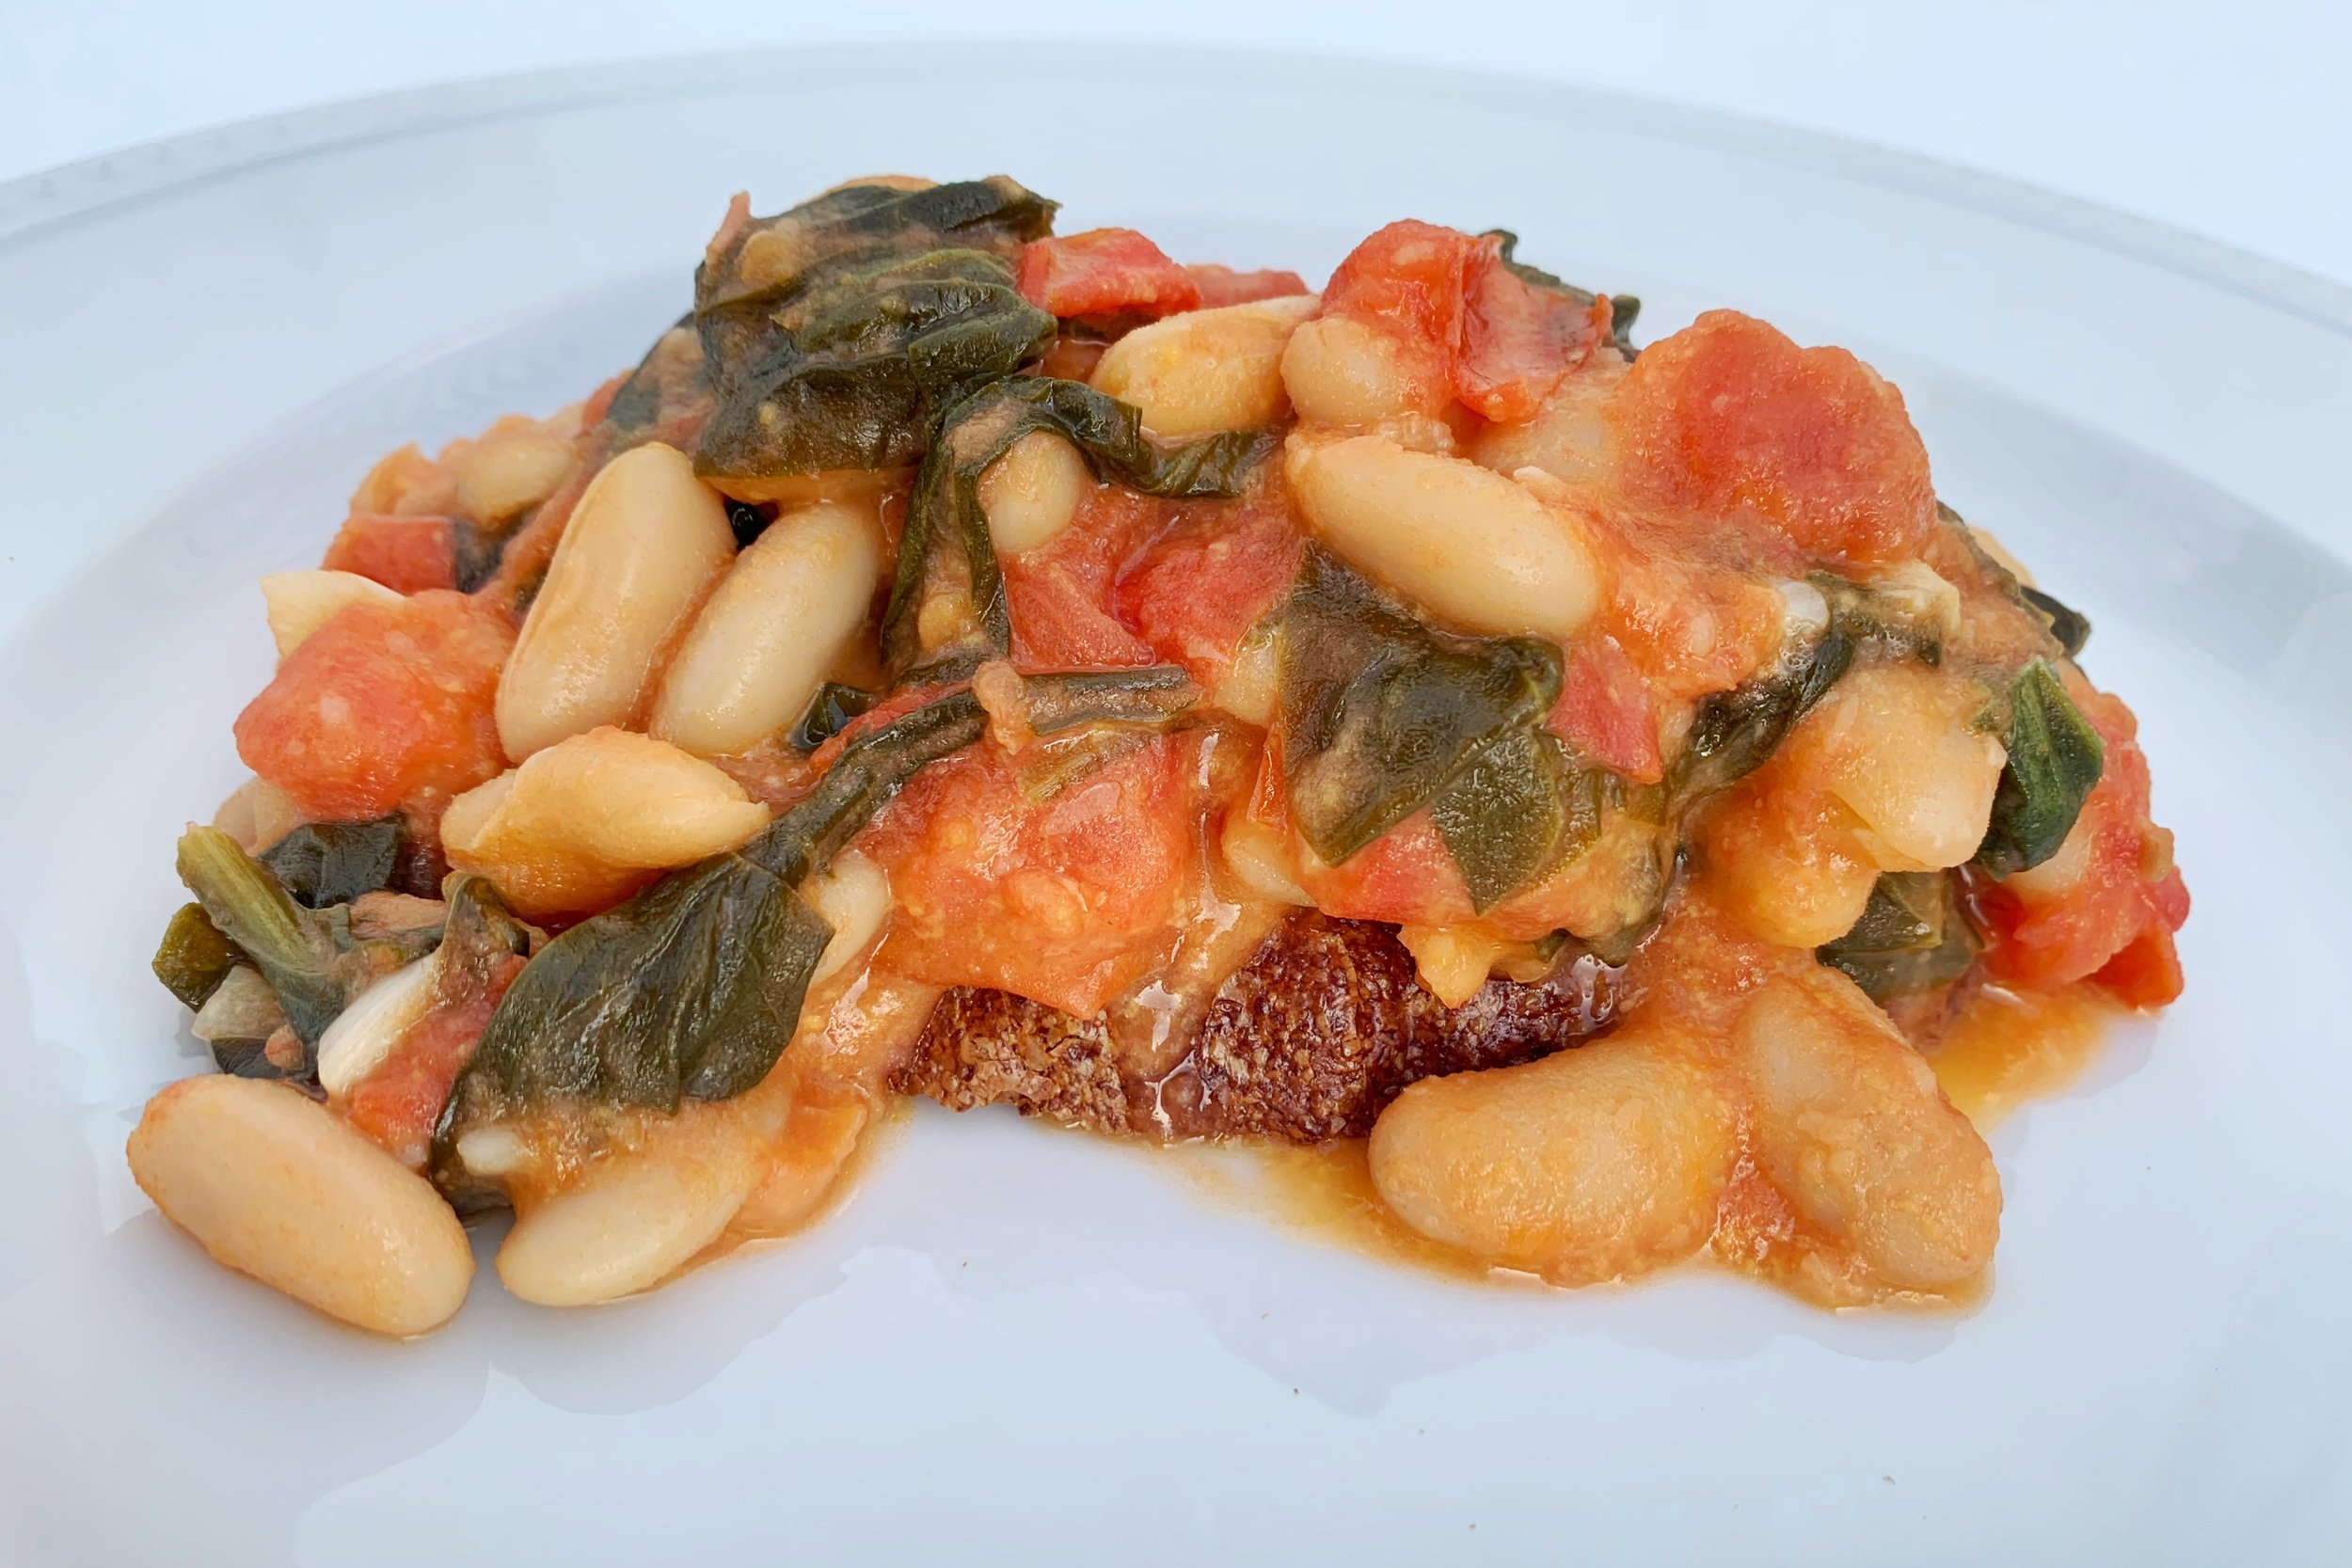 Find cannellini beans in this Beans on Toast Recipe!